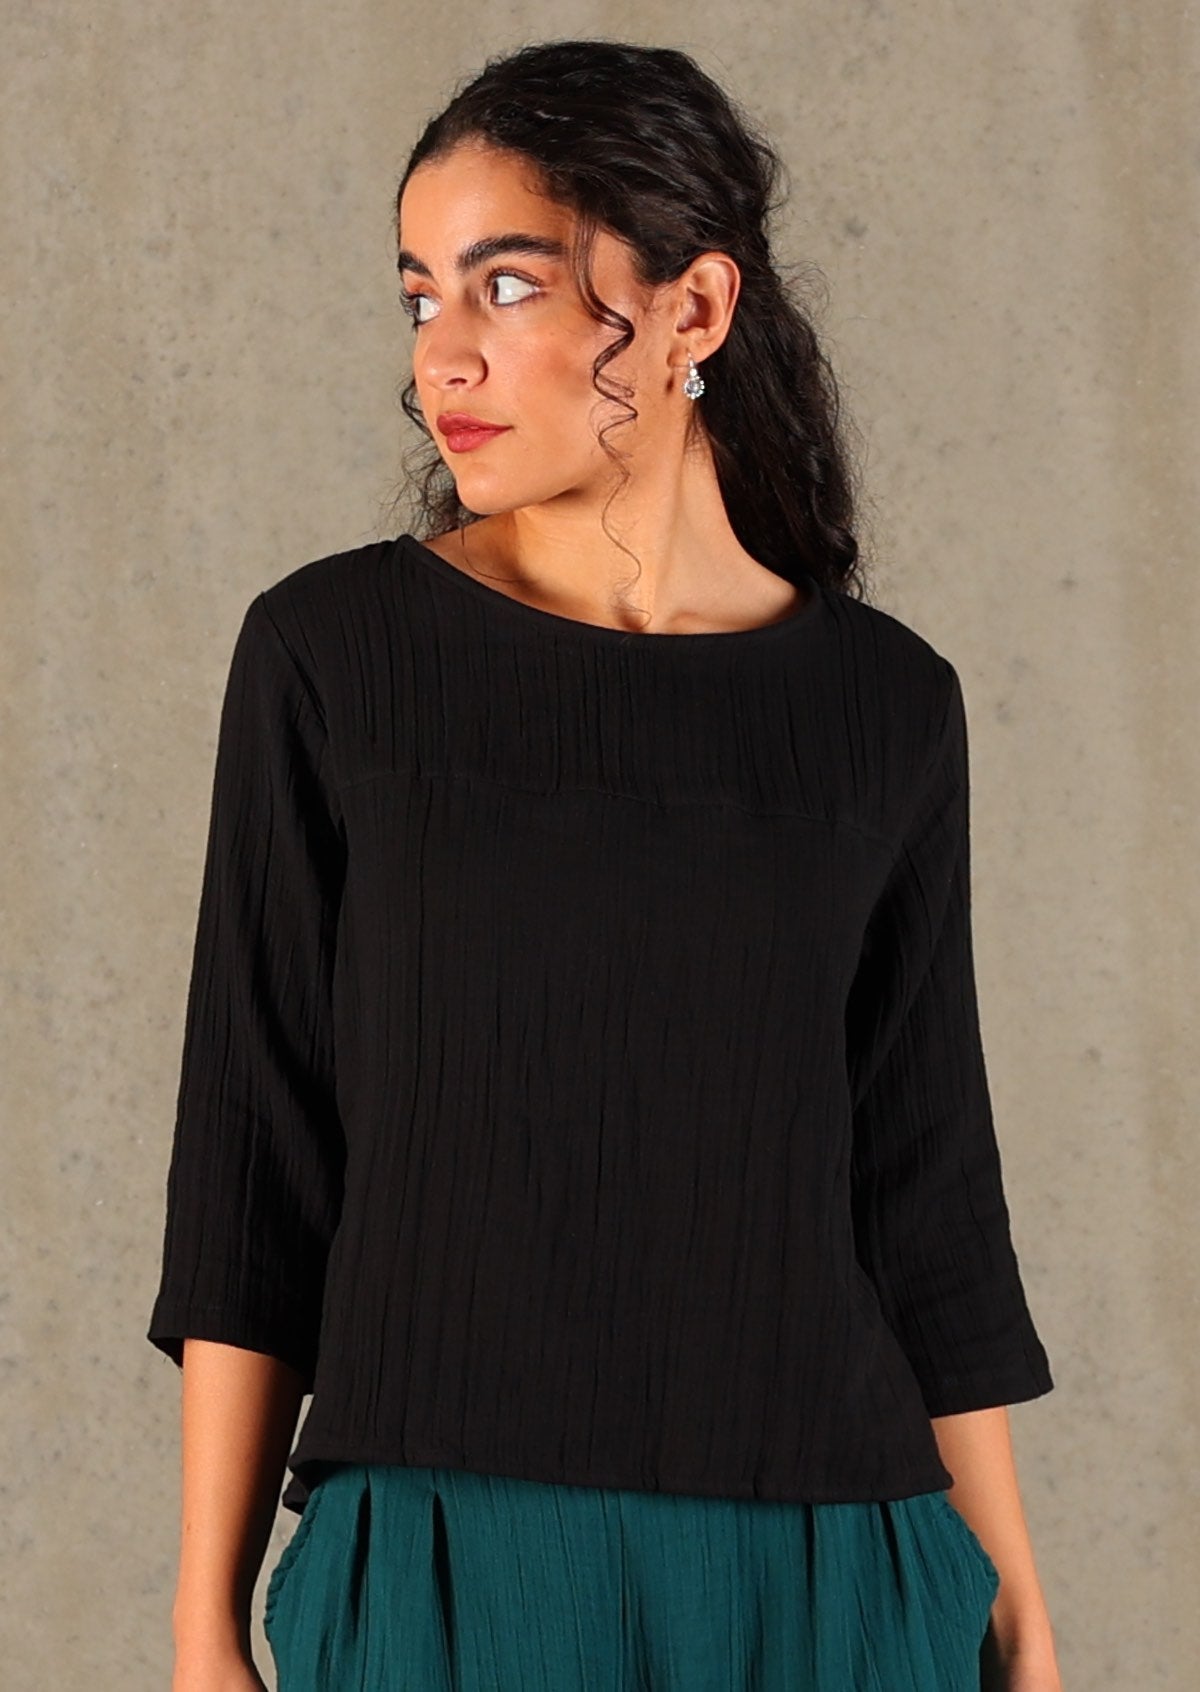 Model wears black double cotton top with 3/4 sleeves and high round neckline